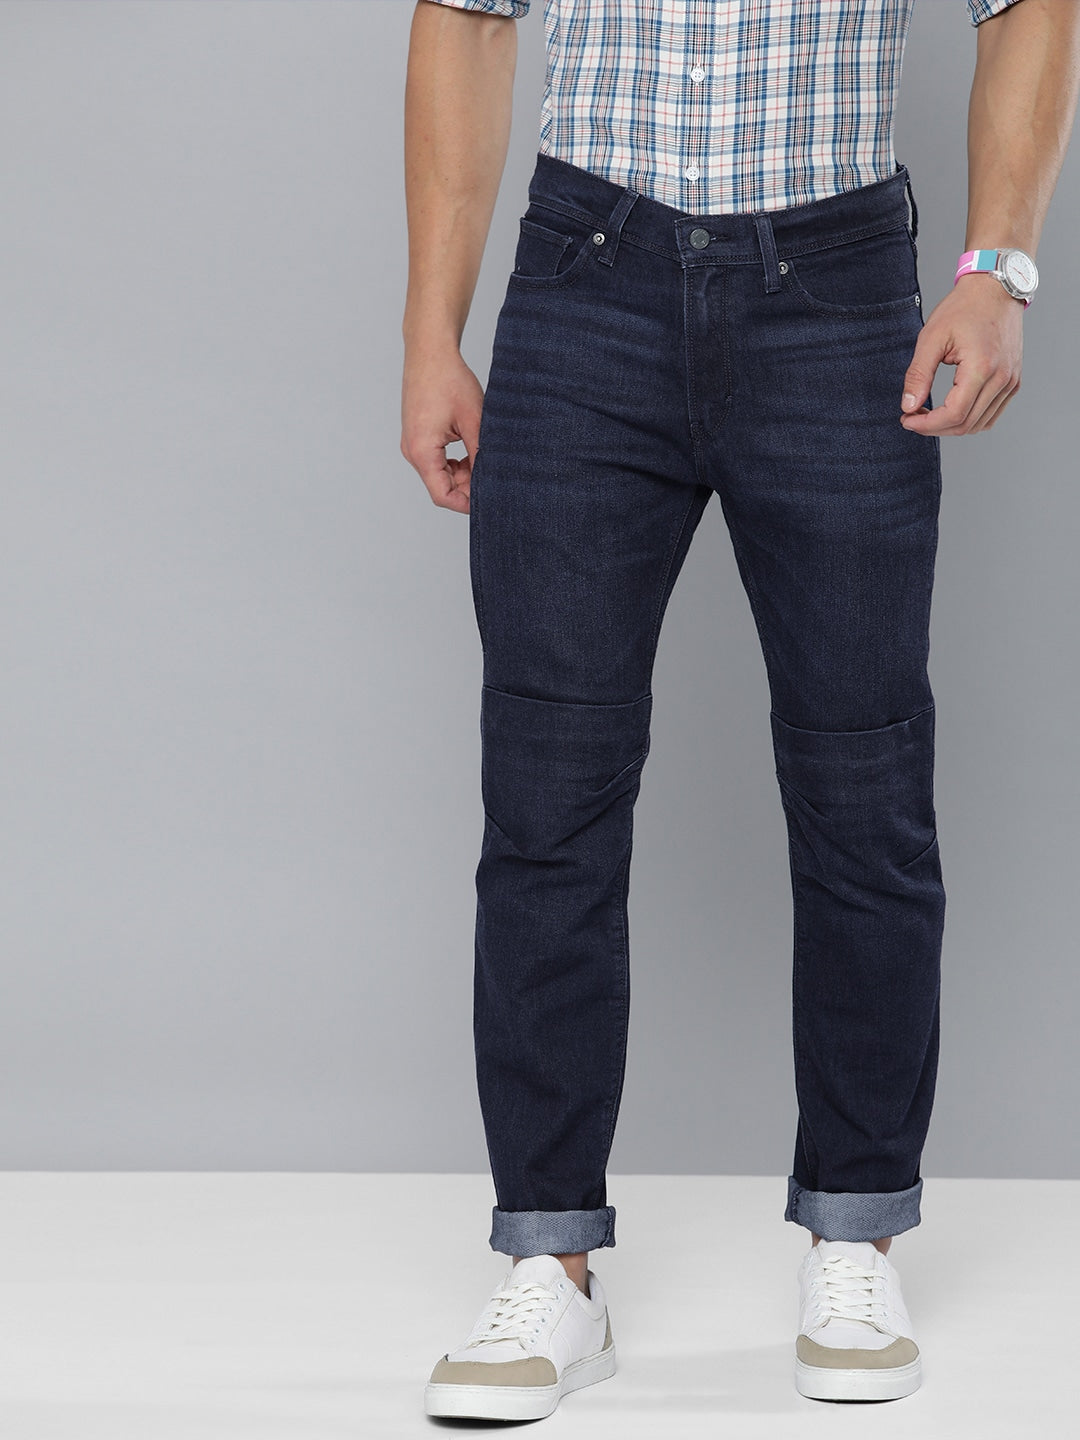 Men's Motorcycle Collection Crafted Jeans